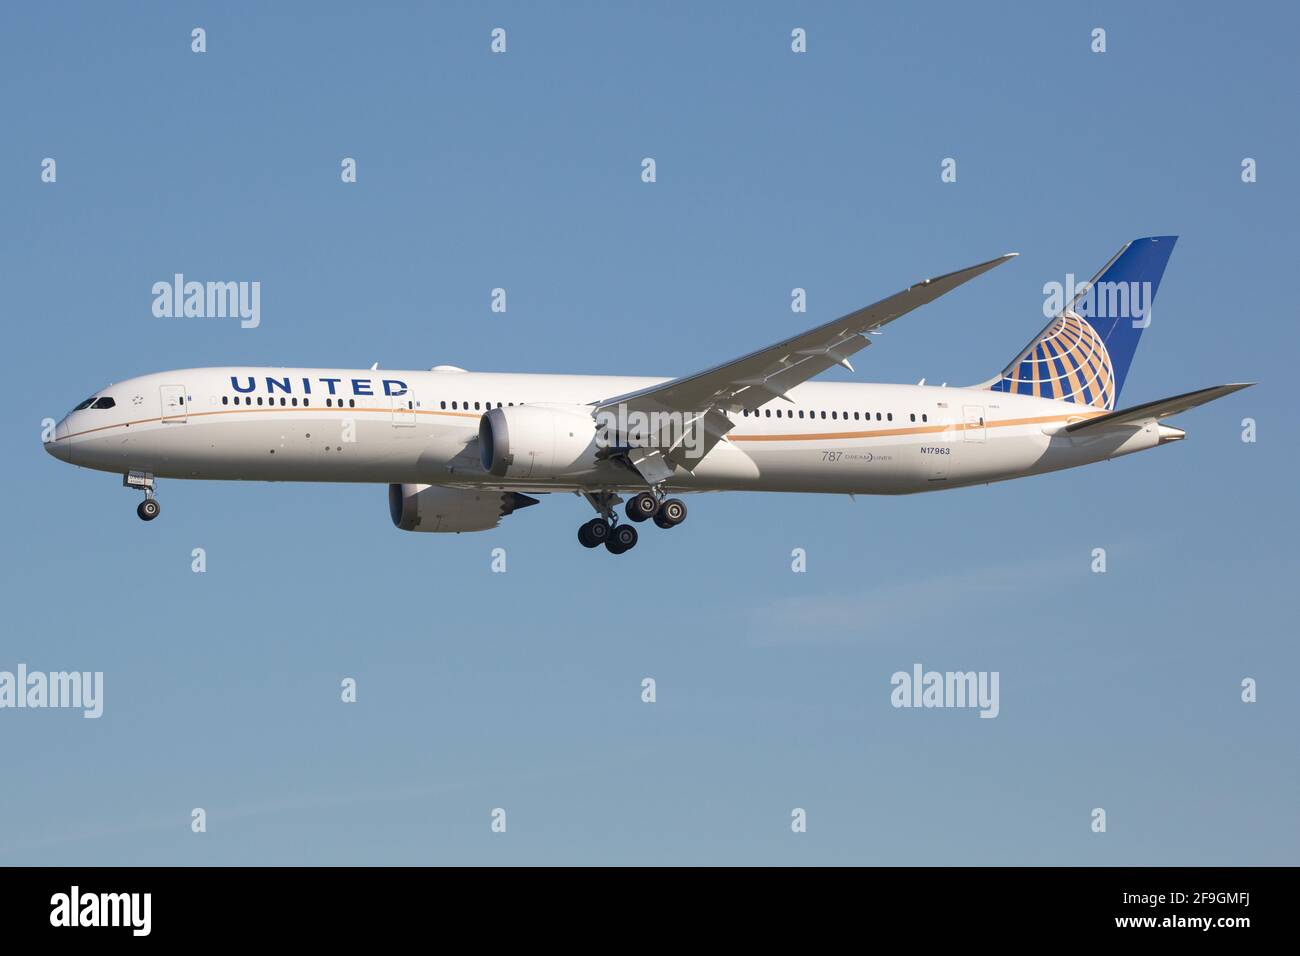 Los Angeles, USA - 21. February 2016: United Airlines Boeing 787-9 at Los Angeles airport (LAX) in the USA. Boeing is an aircraft manufacturer based i Stock Photo